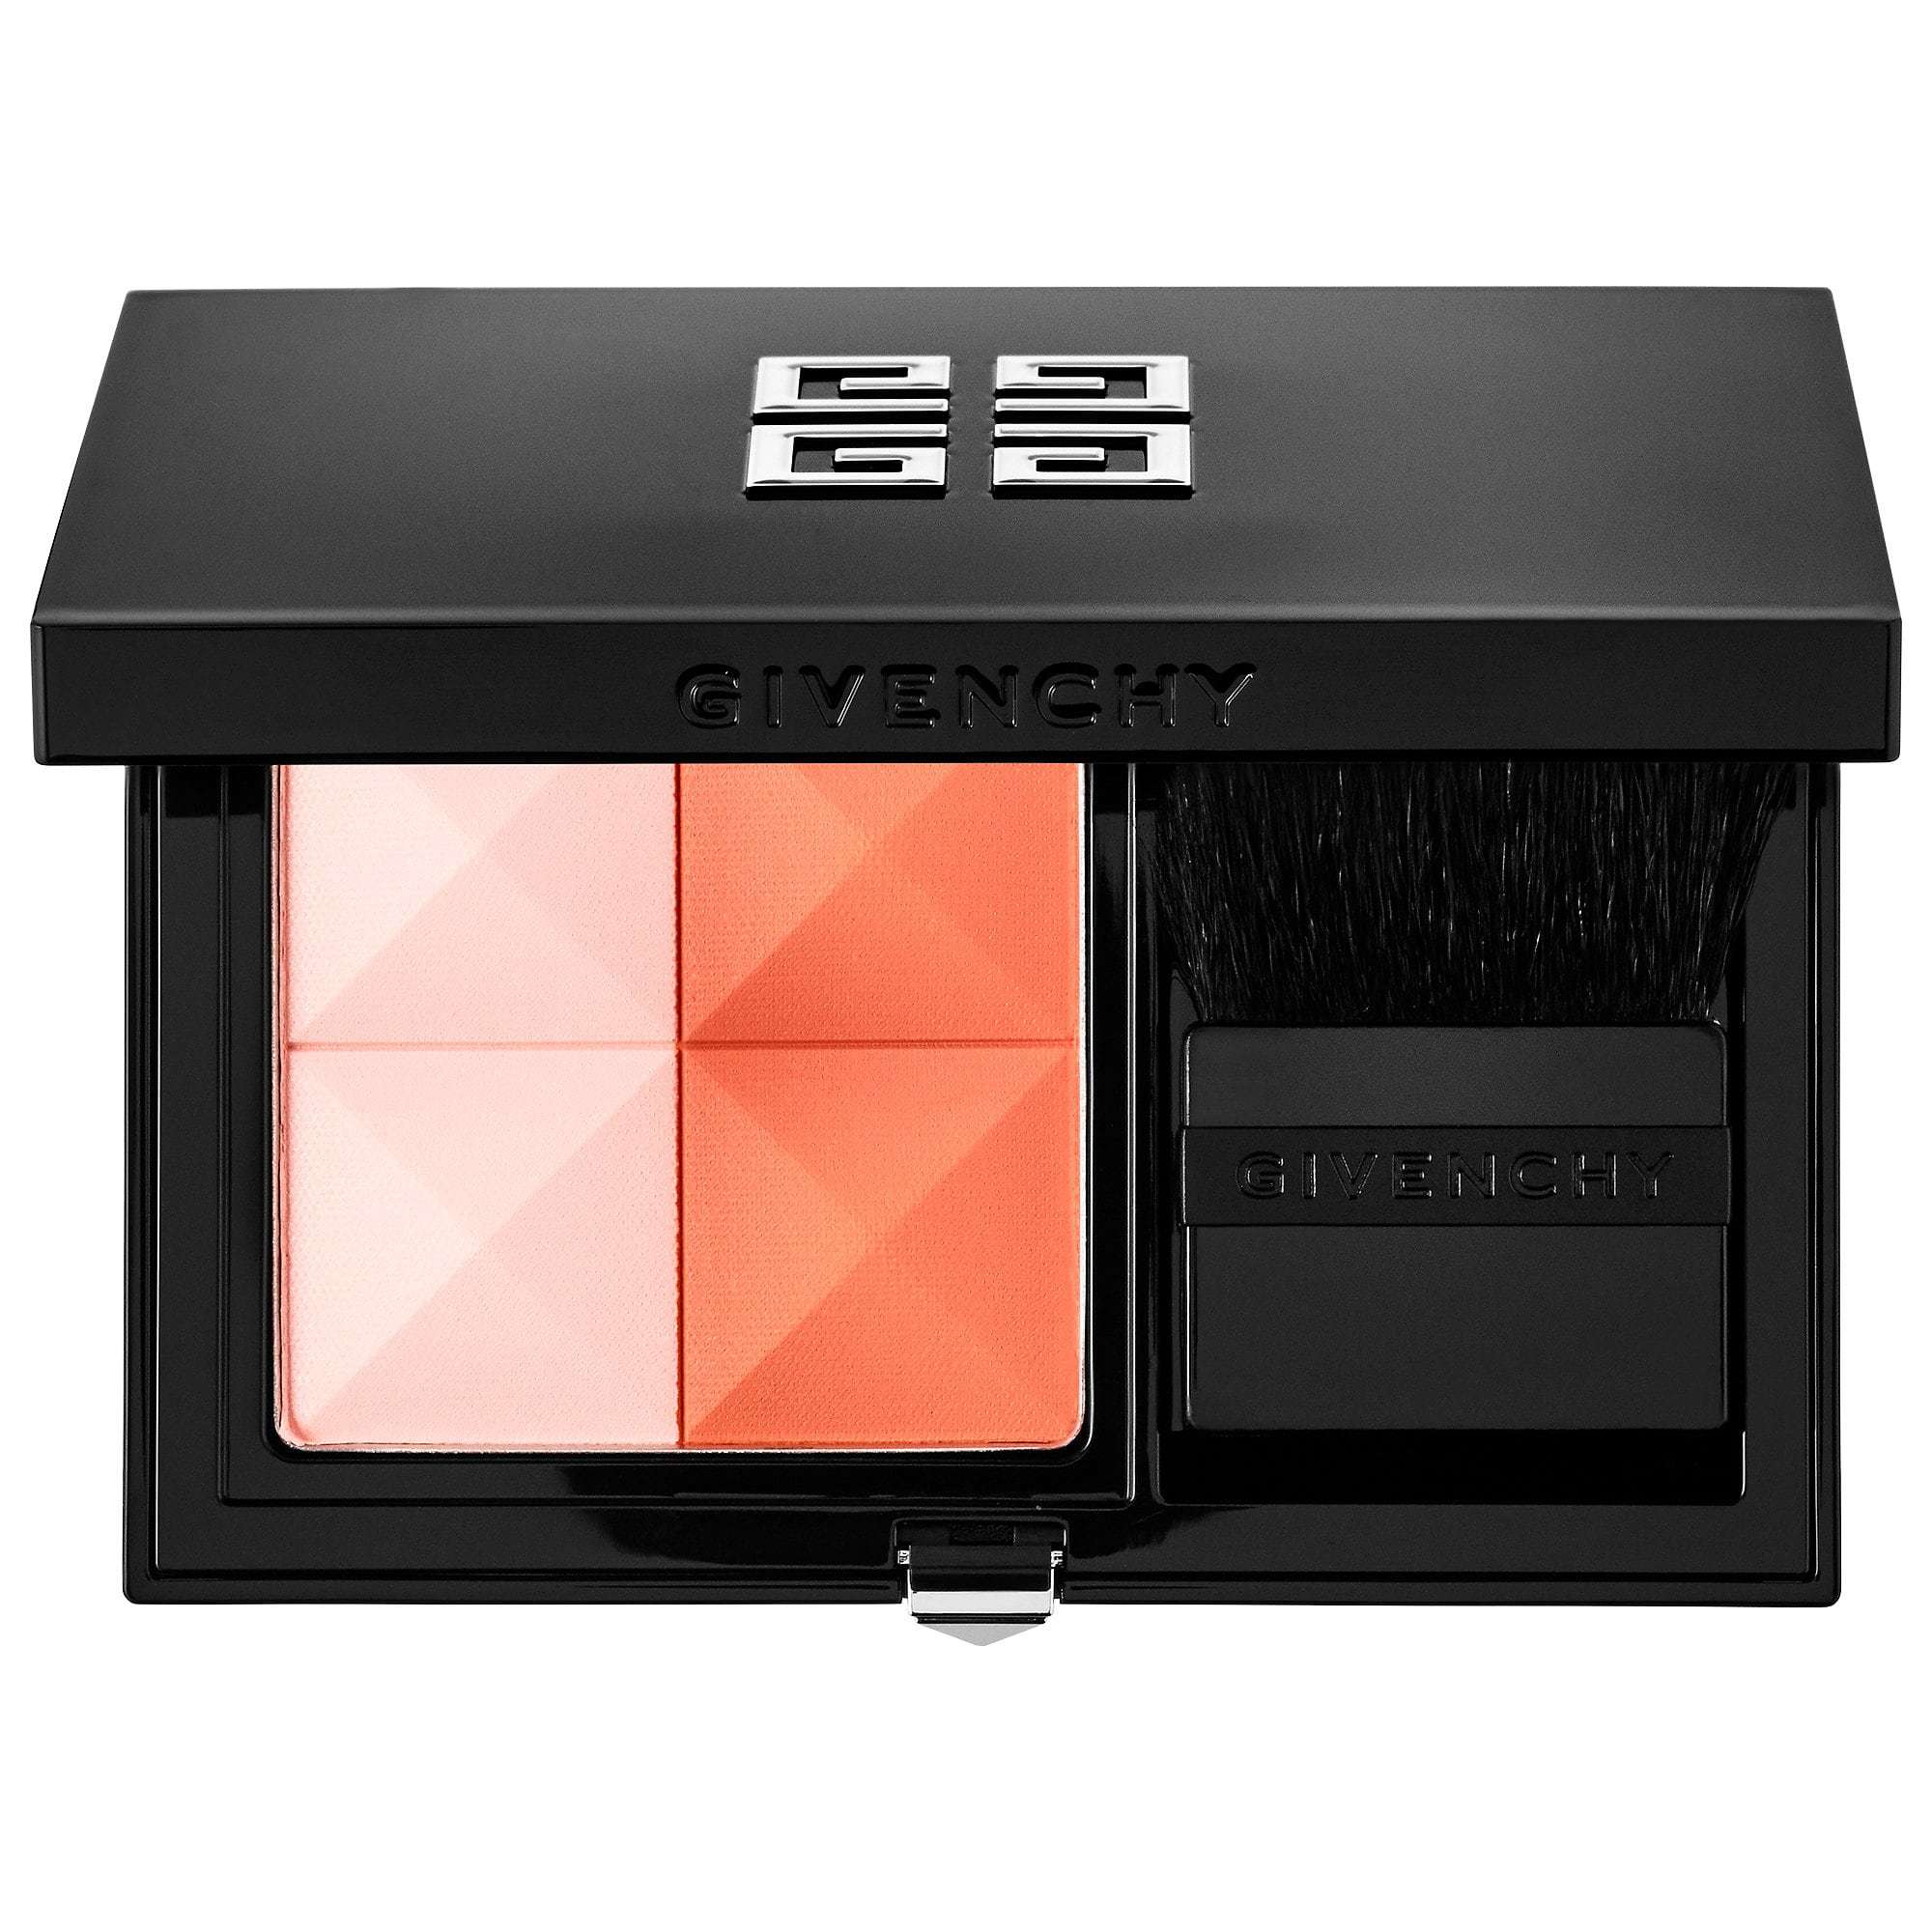 Givenchy Prisme Blush Highlight & Structure Blush Duo Spirit 05